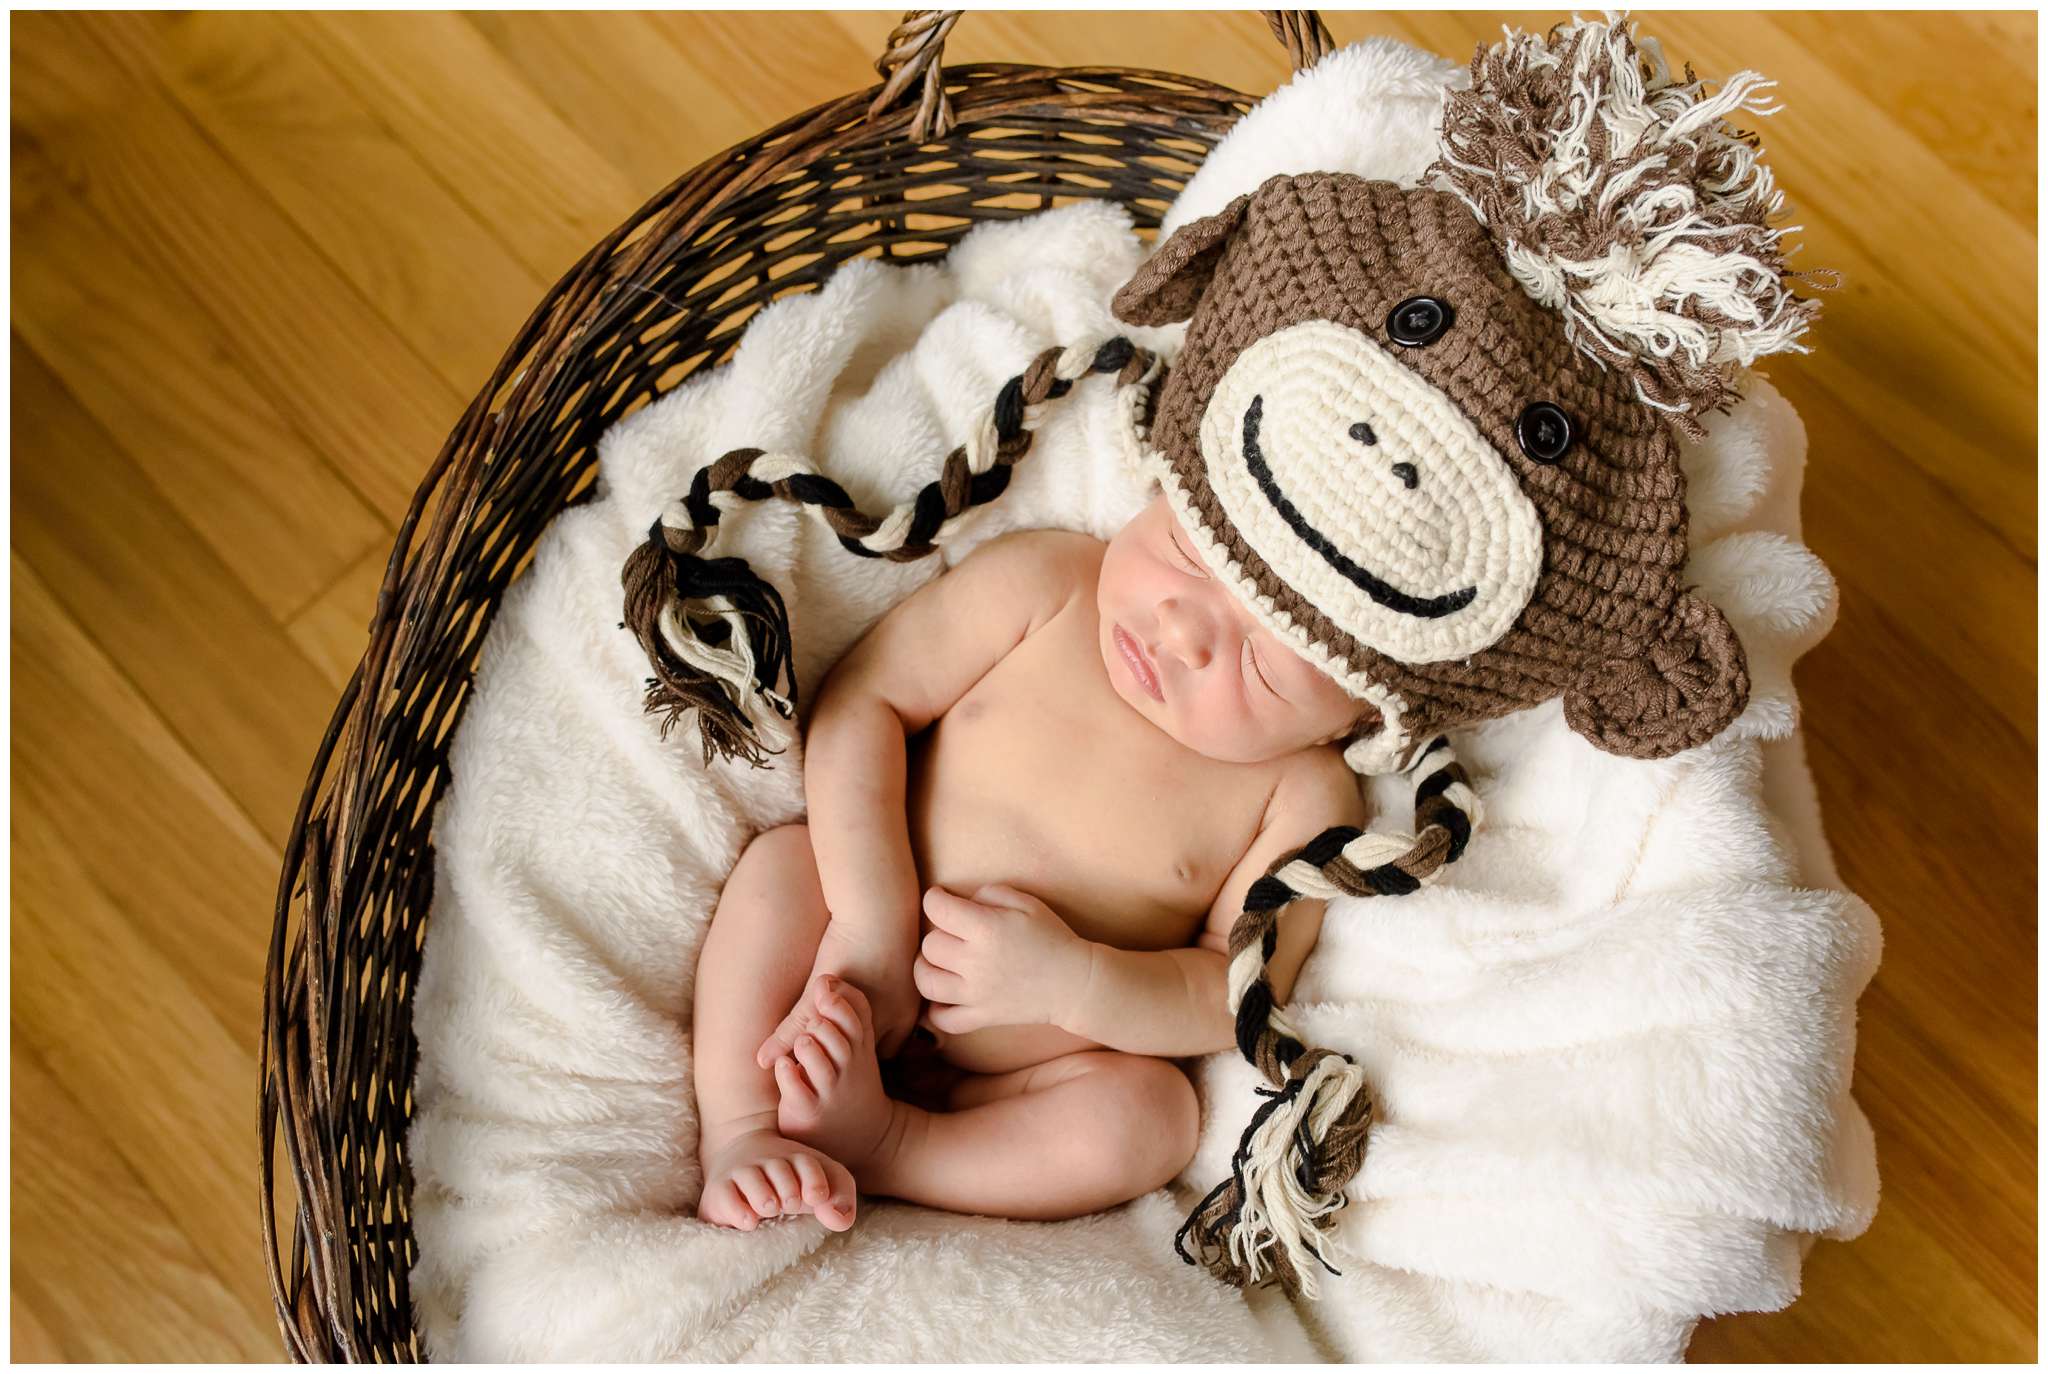  Yes, the monkey hat was a little big... but still adorable on him lol!&nbsp; 